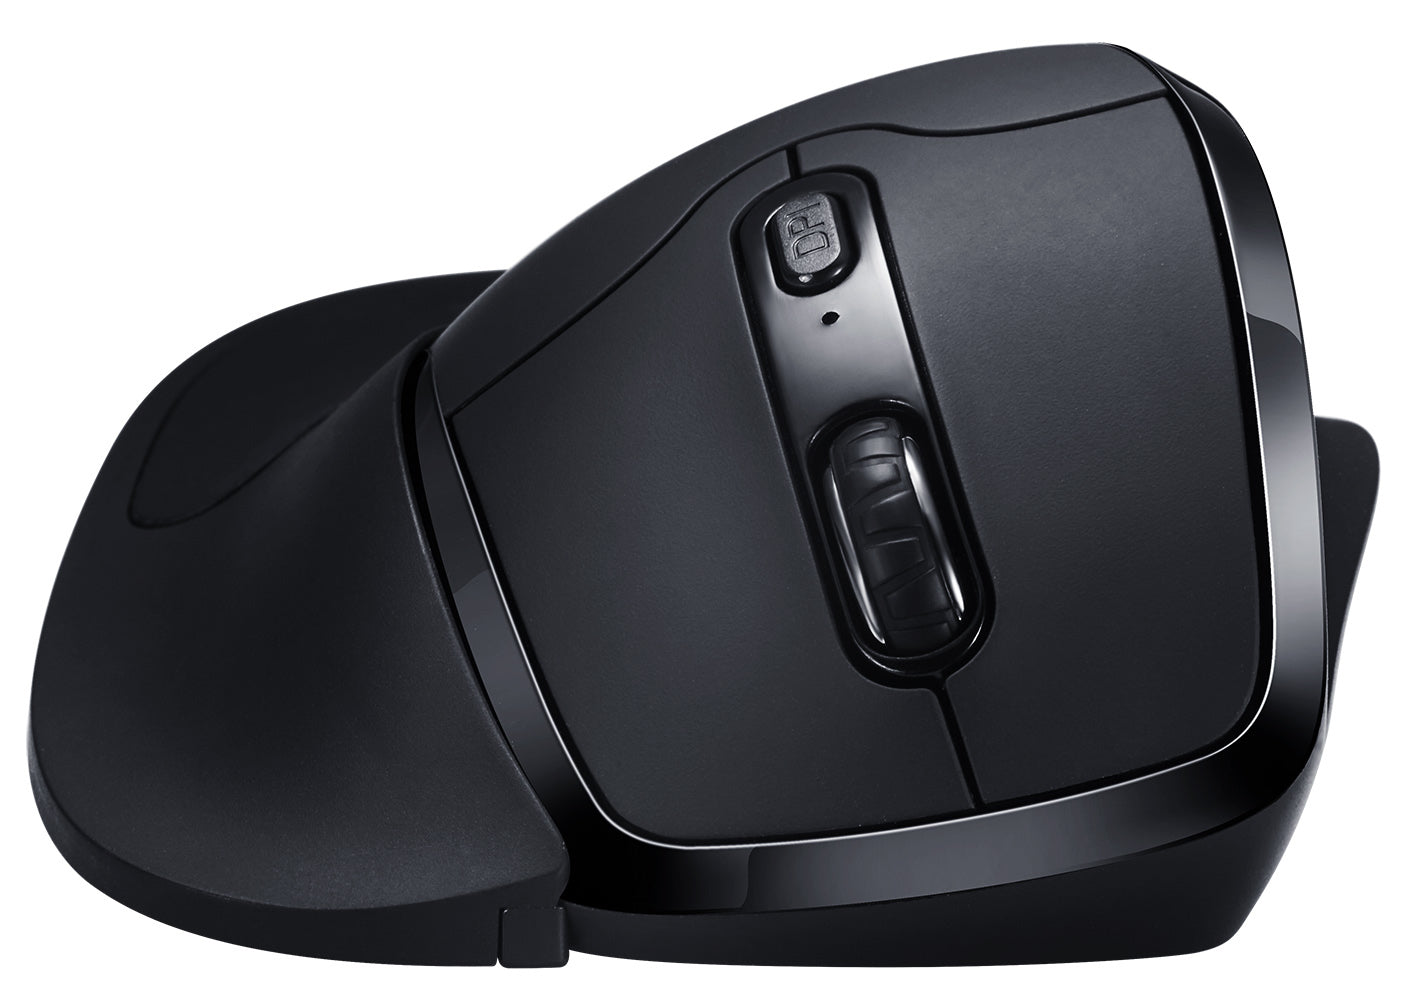 Newtral Laser Mouse - Large Wireless